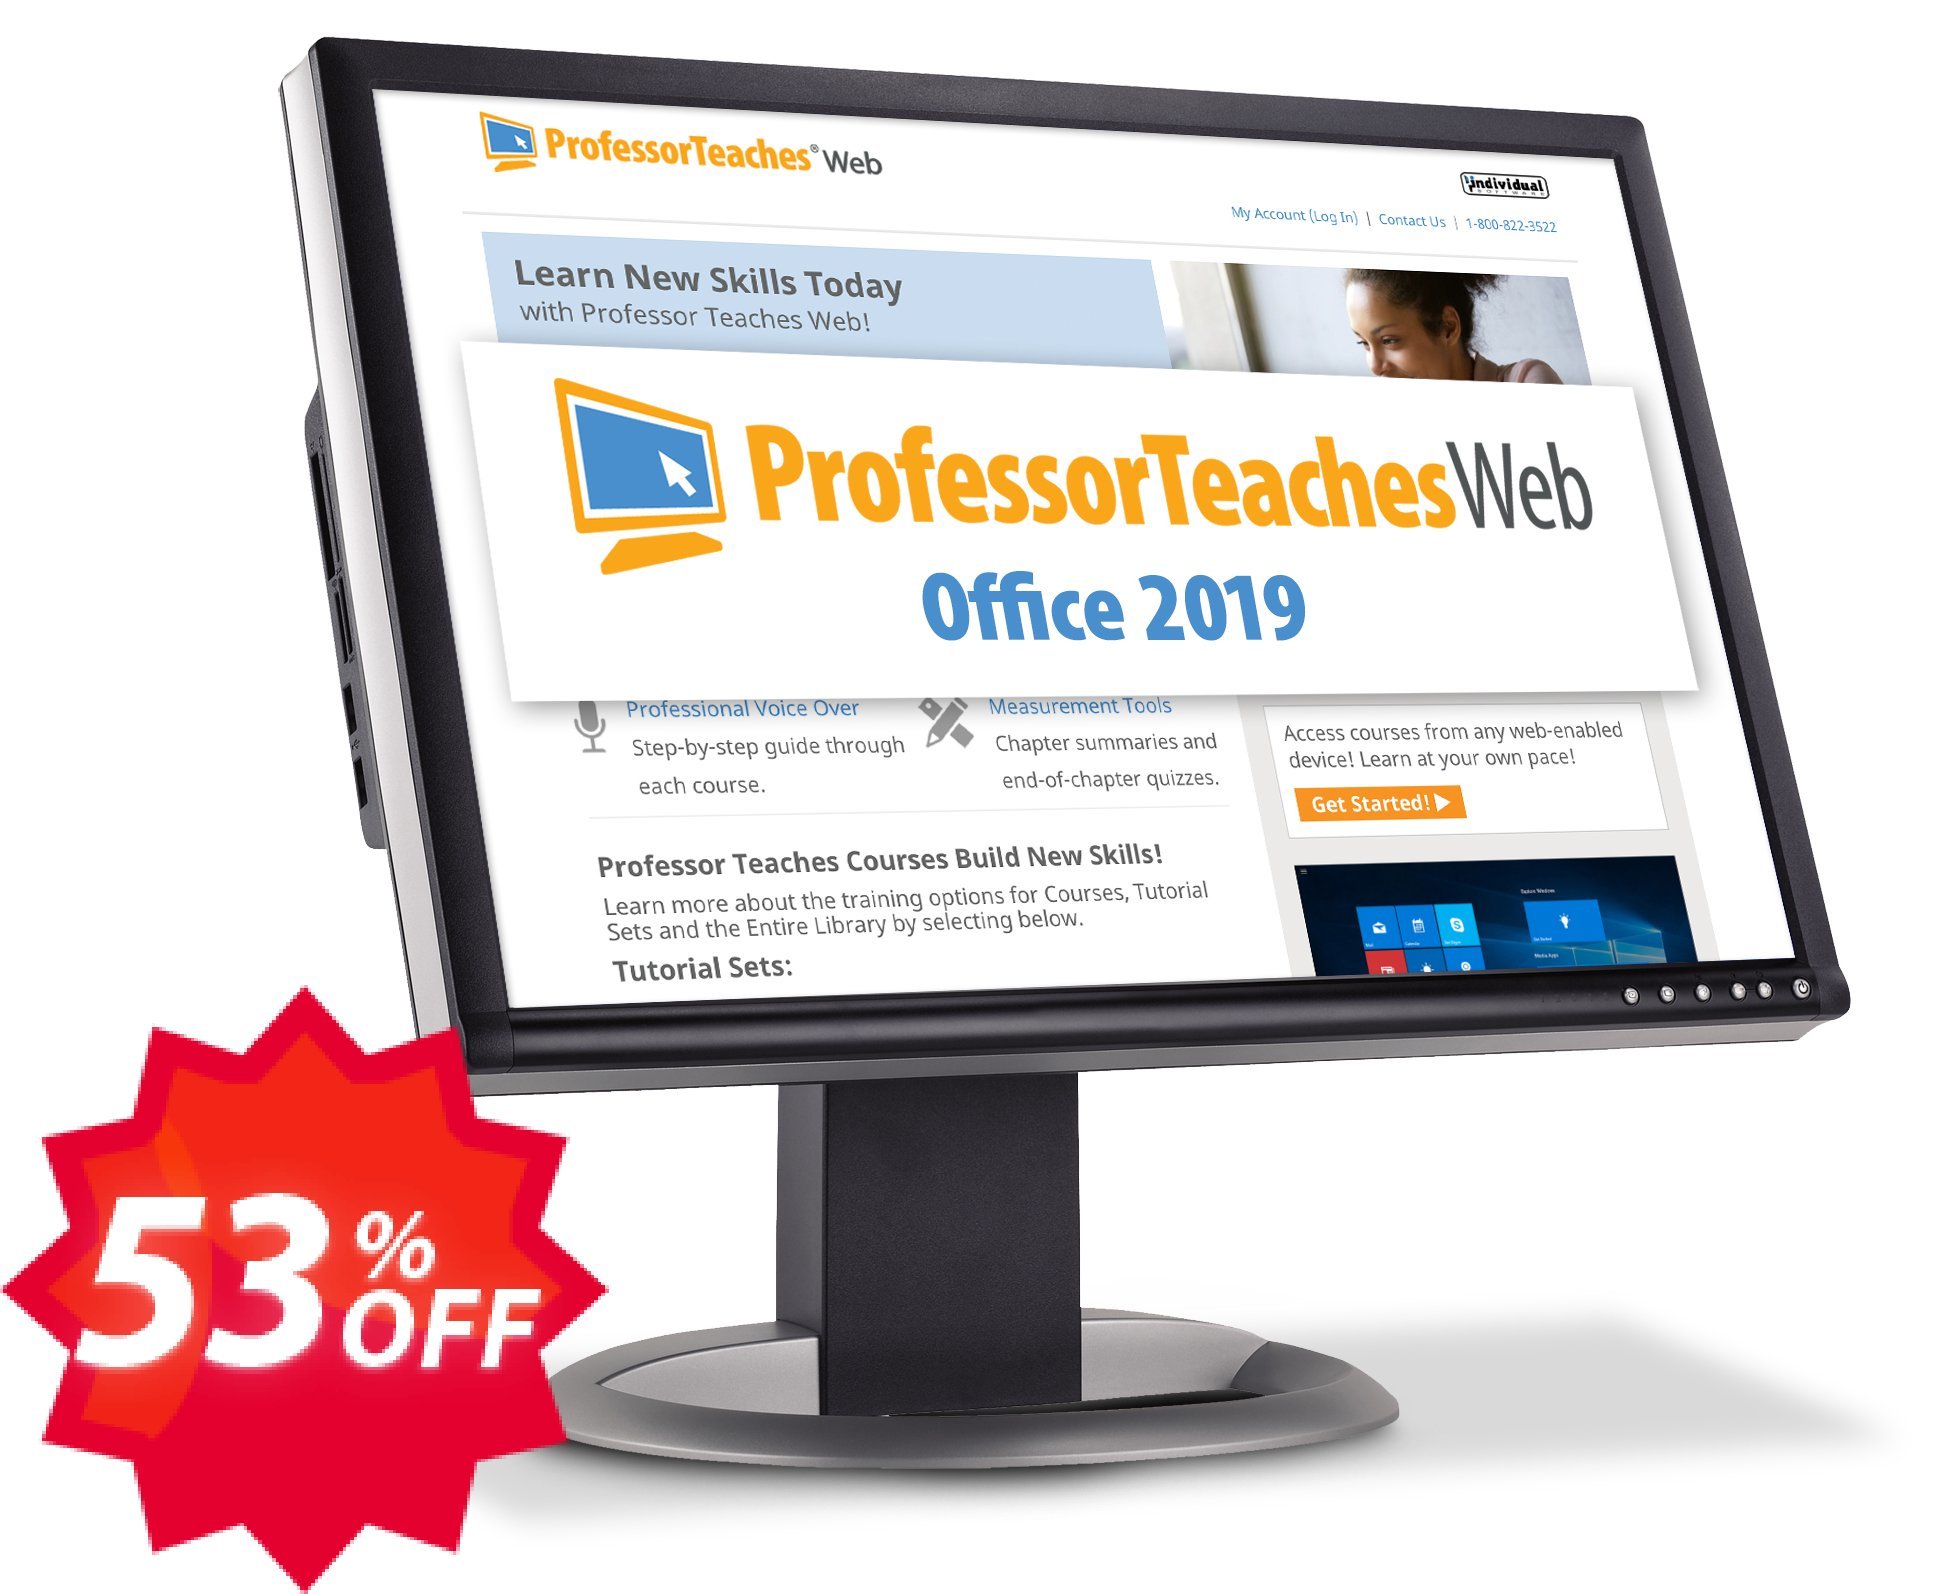 Professor Teaches Web - Office 2019, Quarterly Subscription  Coupon code 53% discount 